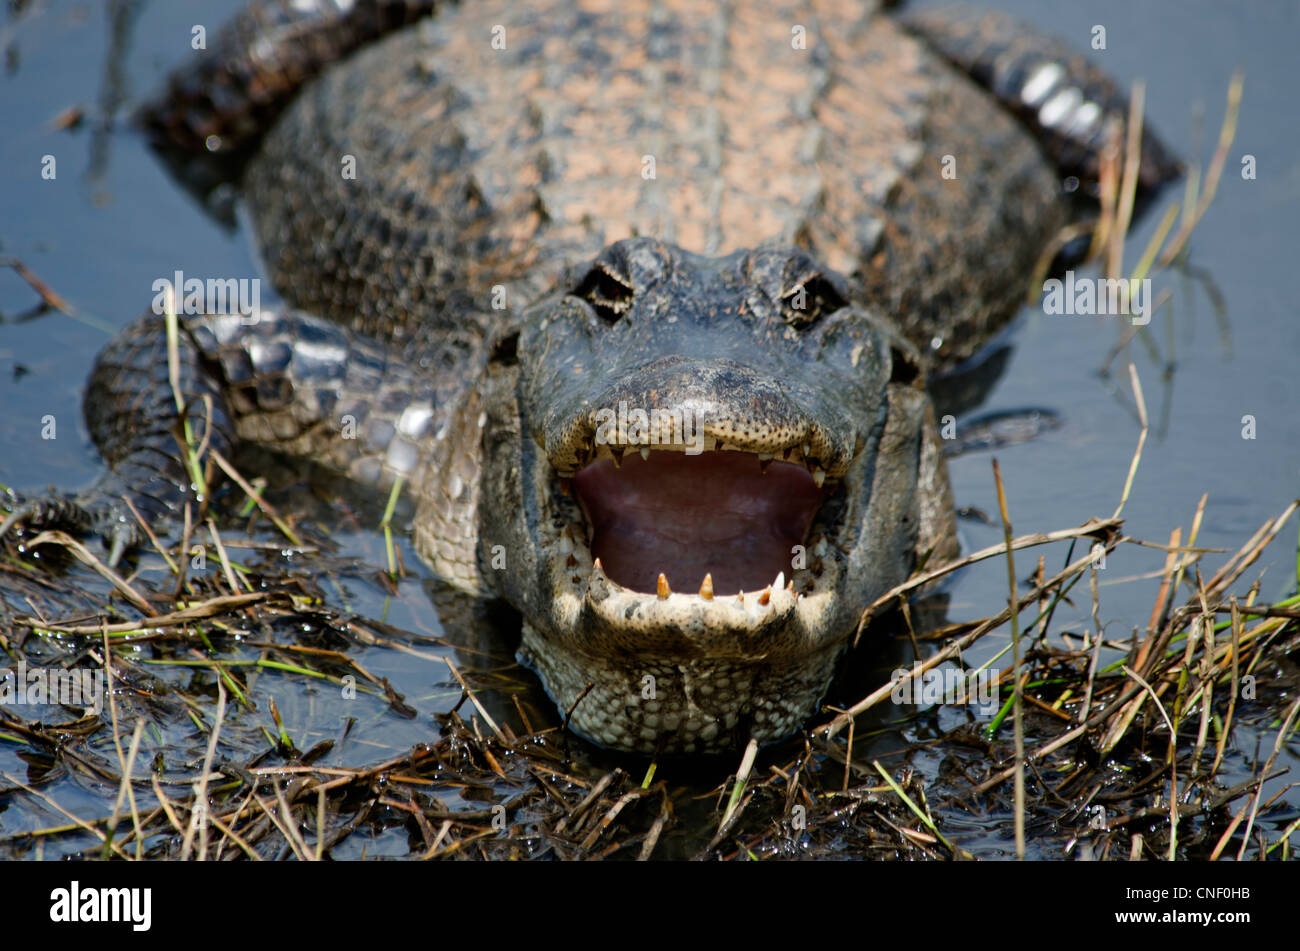 American Alligator, Alligator mississippiensis, with mouth open in a threatening manner. Sabine National Wildlife Refuge, Louisiana, USA Stock Photo